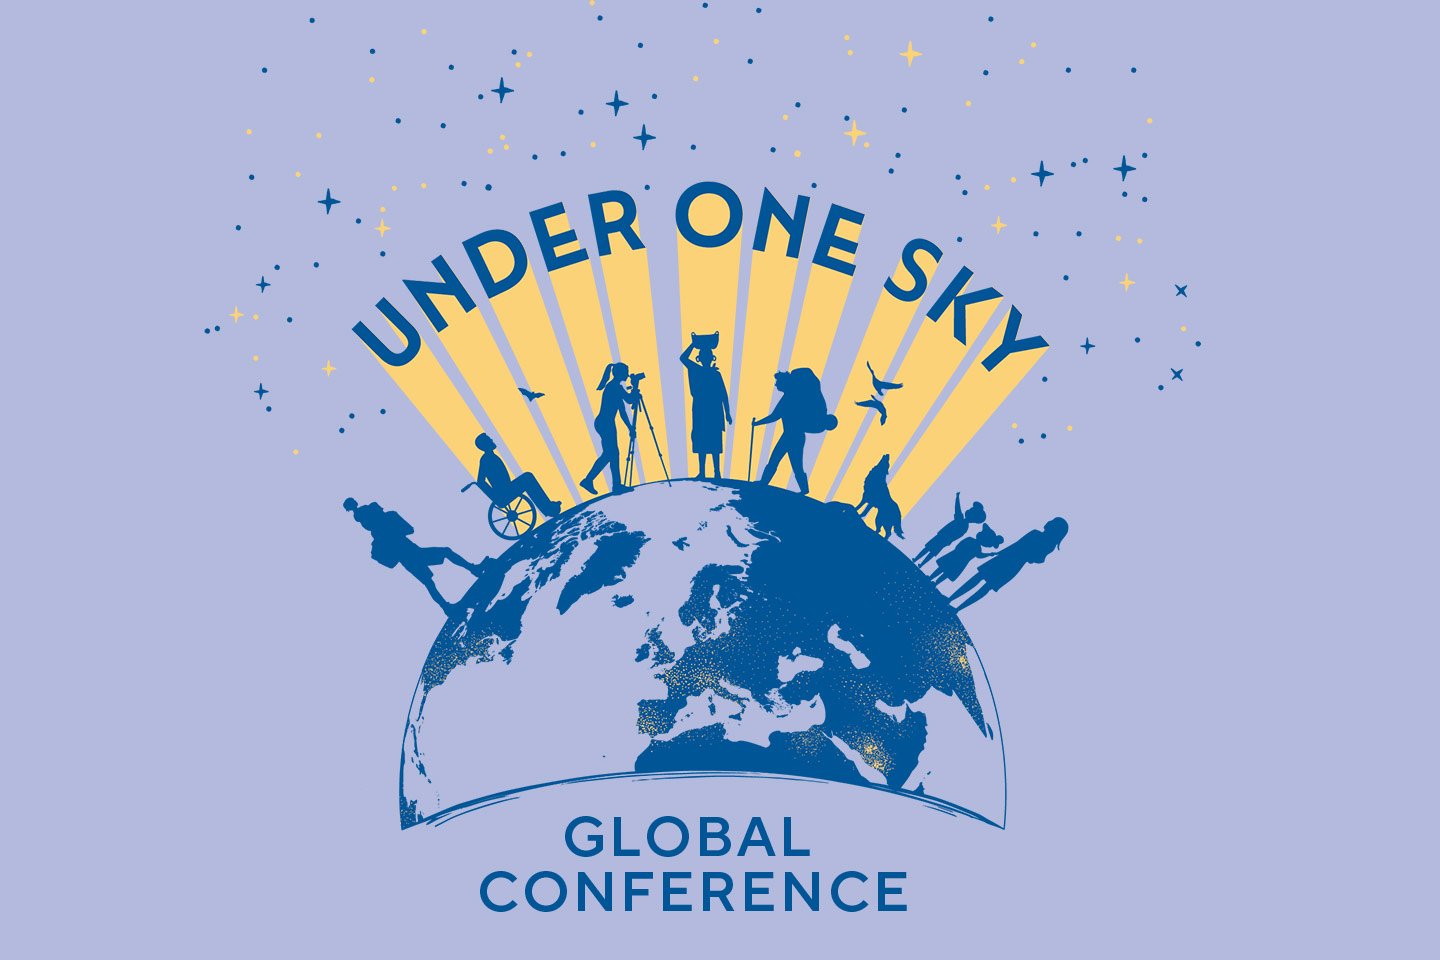 Logo of Under One Sky Global Conference, showing silhouettes of people all over the globe.